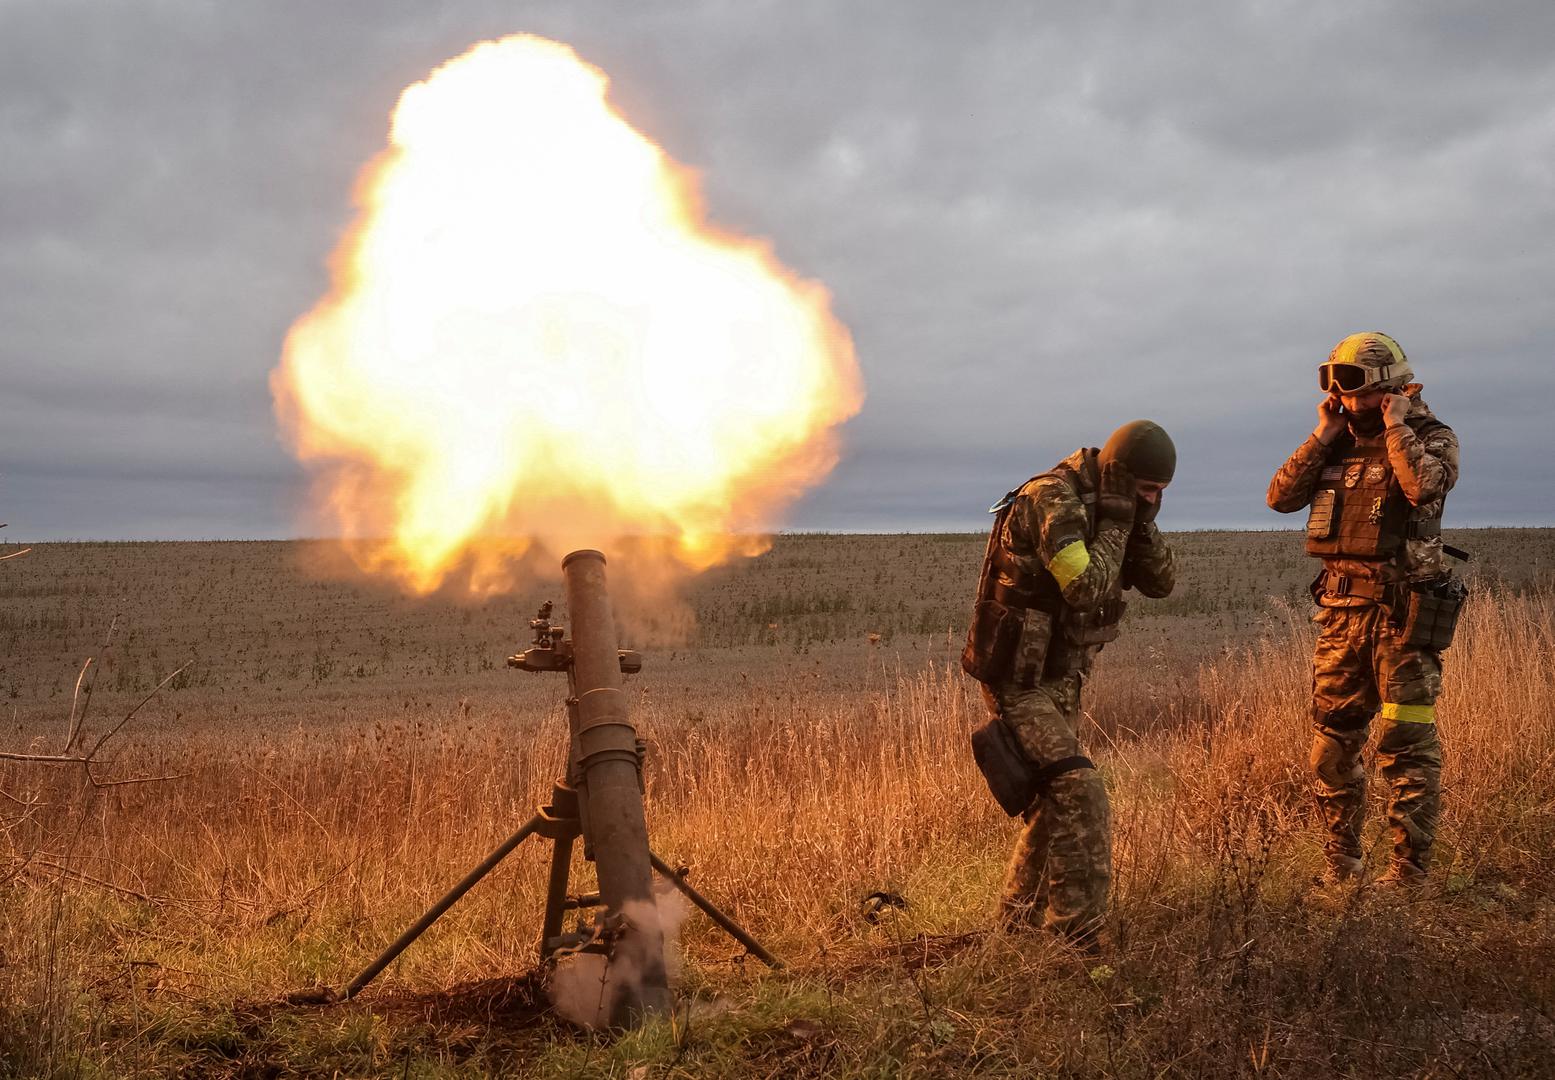 Ukrainian servicemen fire a mortar on a front line, as Russia's attack on Ukraine continues, in Kharkiv region, Ukraine October 25, 2022.  REUTERS/Vyacheslav Madiyevskyy     TPX IMAGES OF THE DAY Photo: VYACHESLAV MADIYEVSKYY/REUTERS